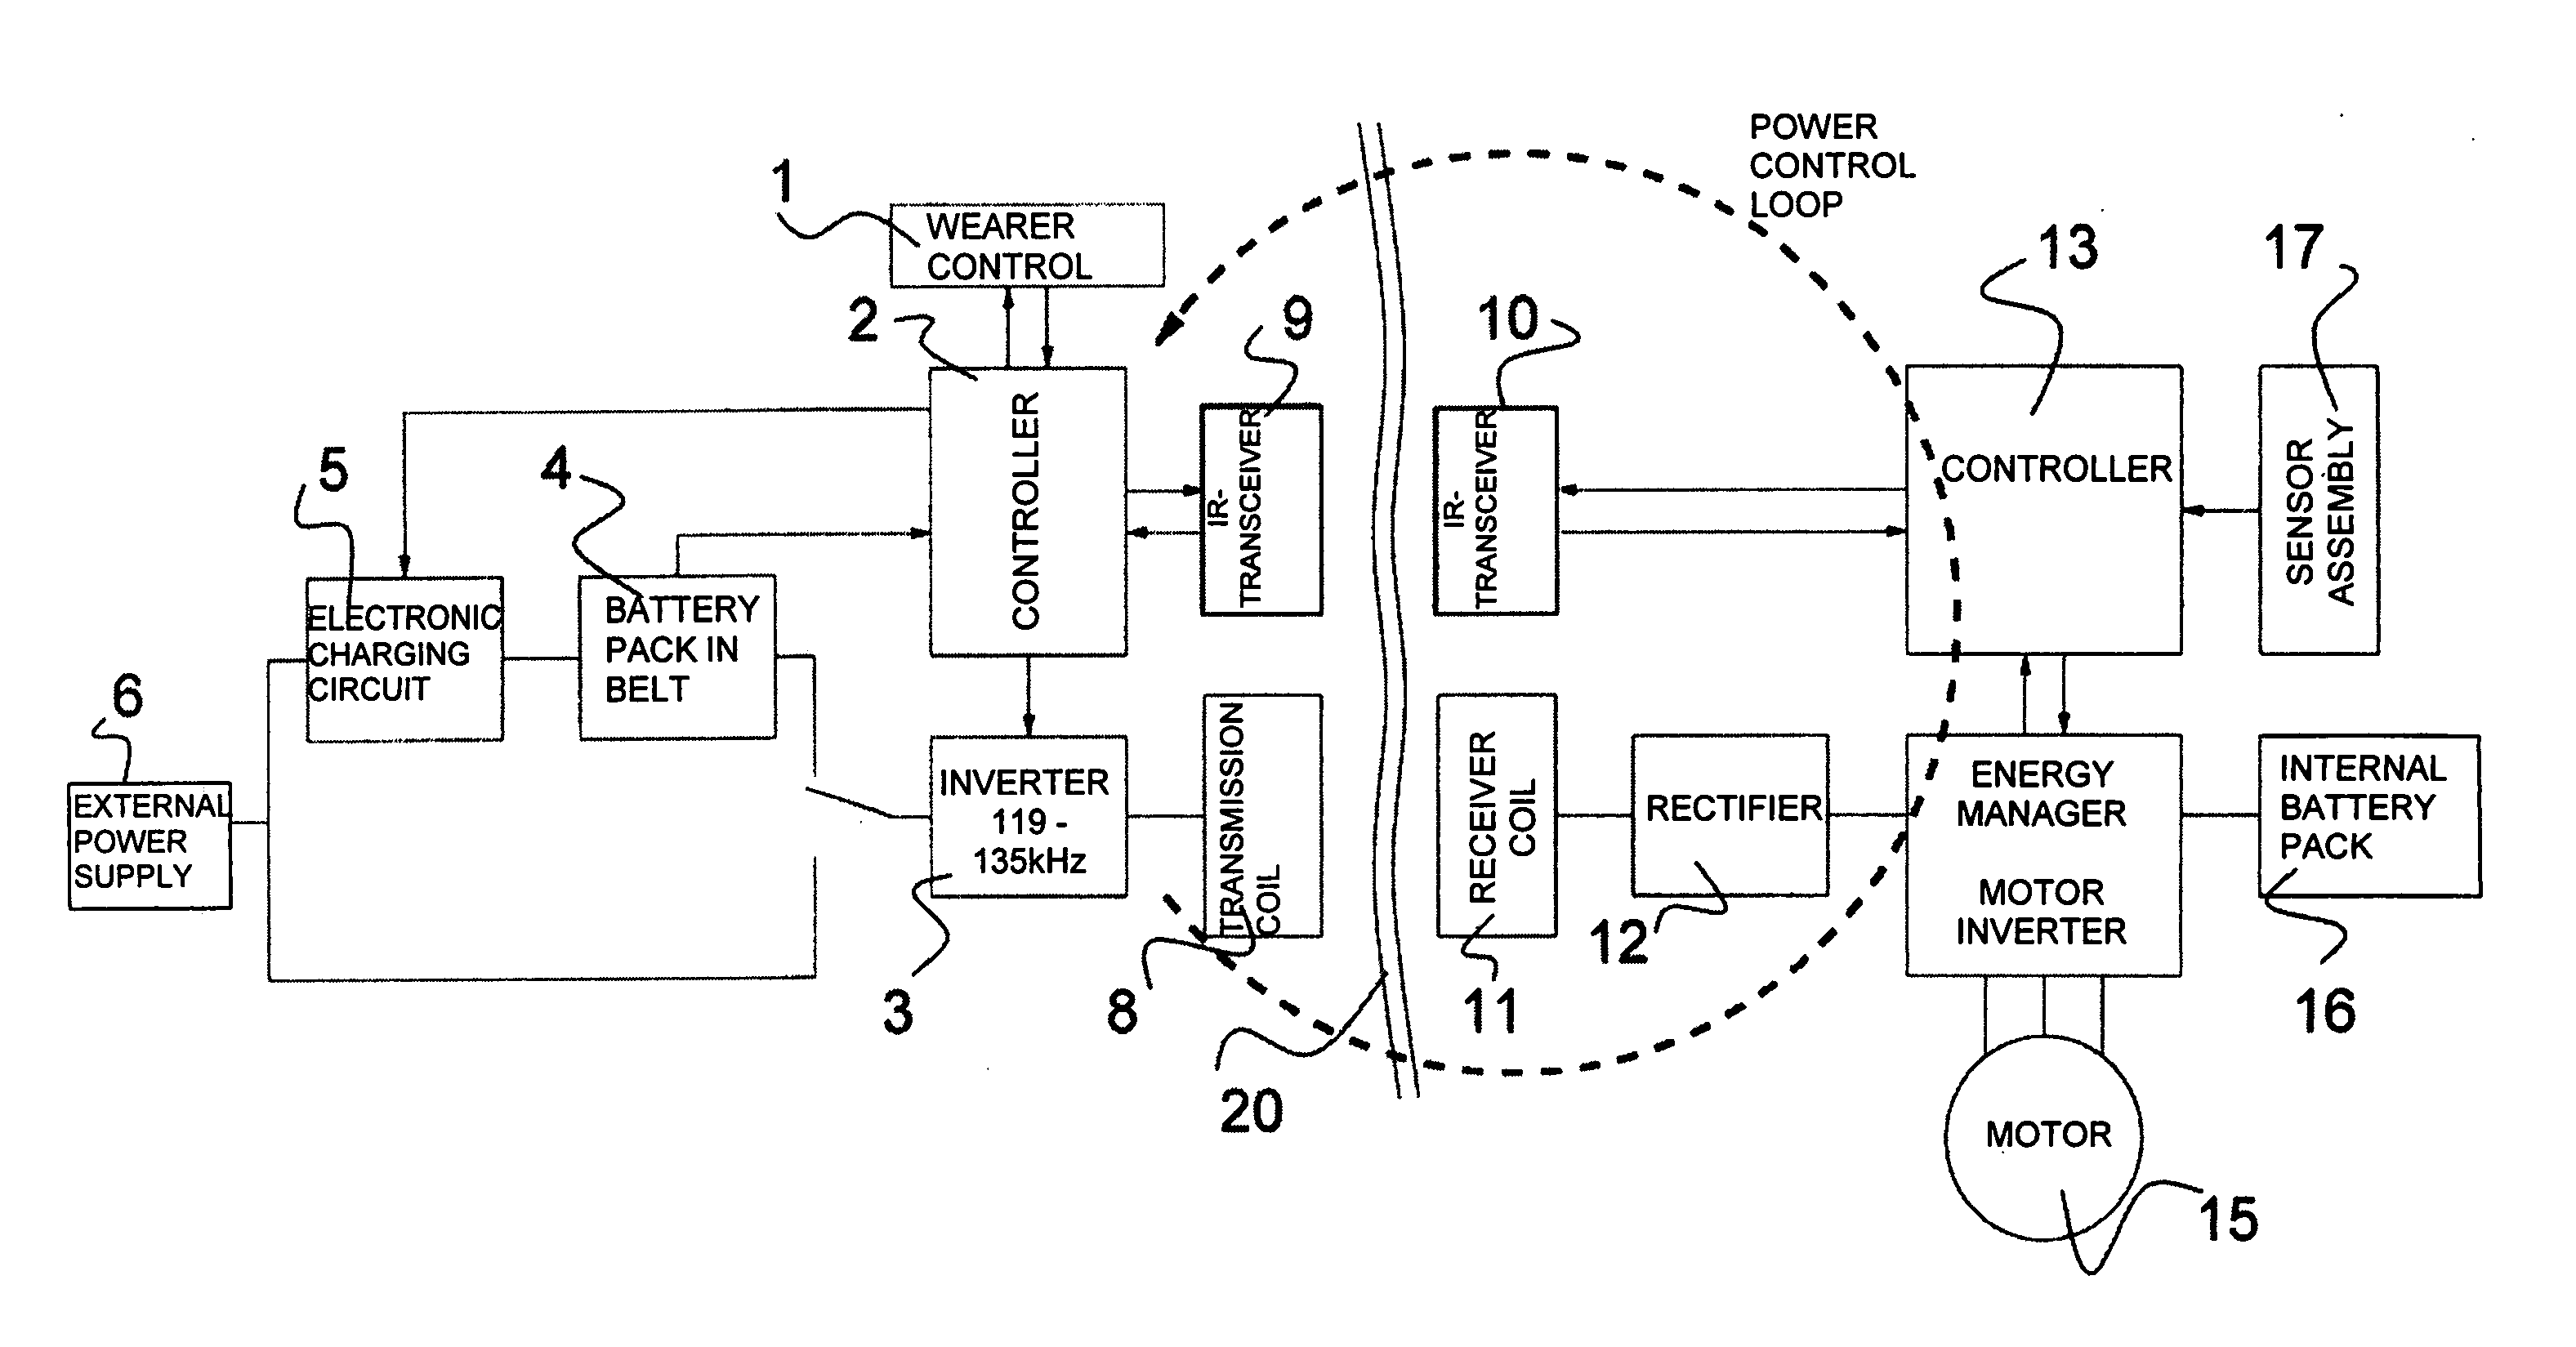 Assembly for wireless energy communication to an implanted device